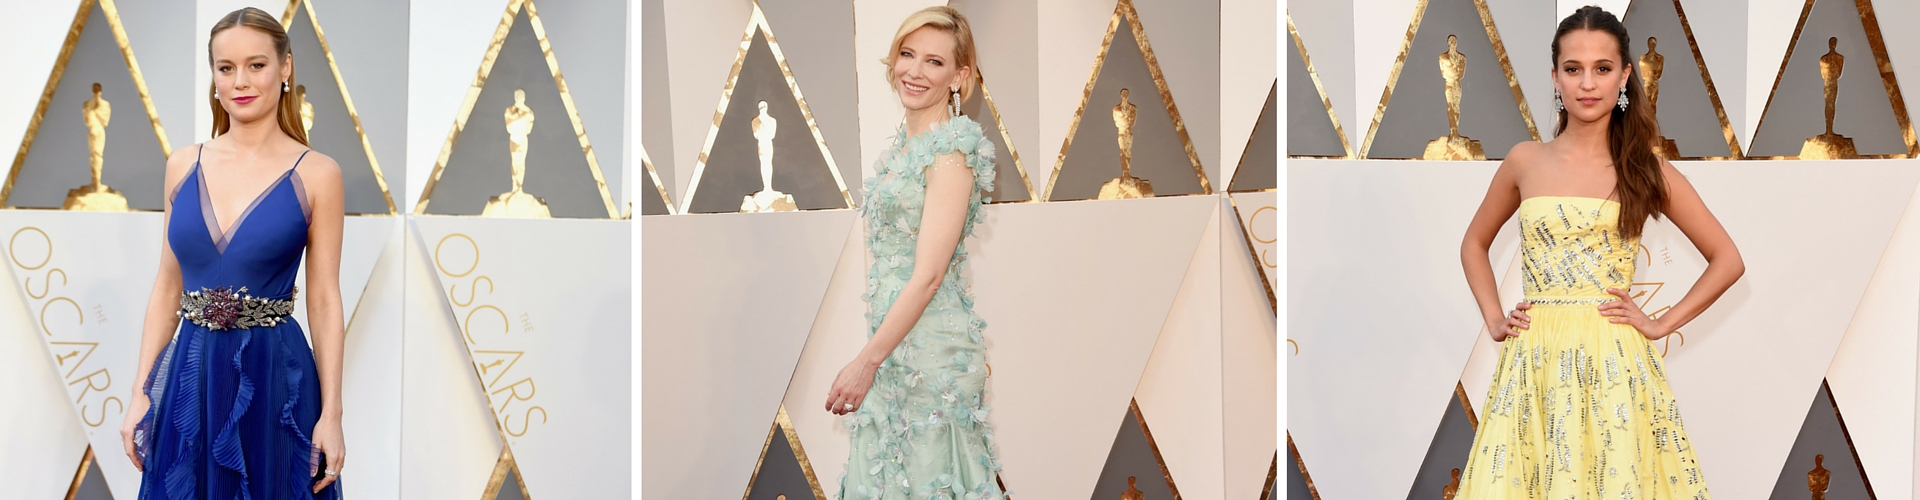 Top 5 BEST and WORST Dressed of the Oscars 2016